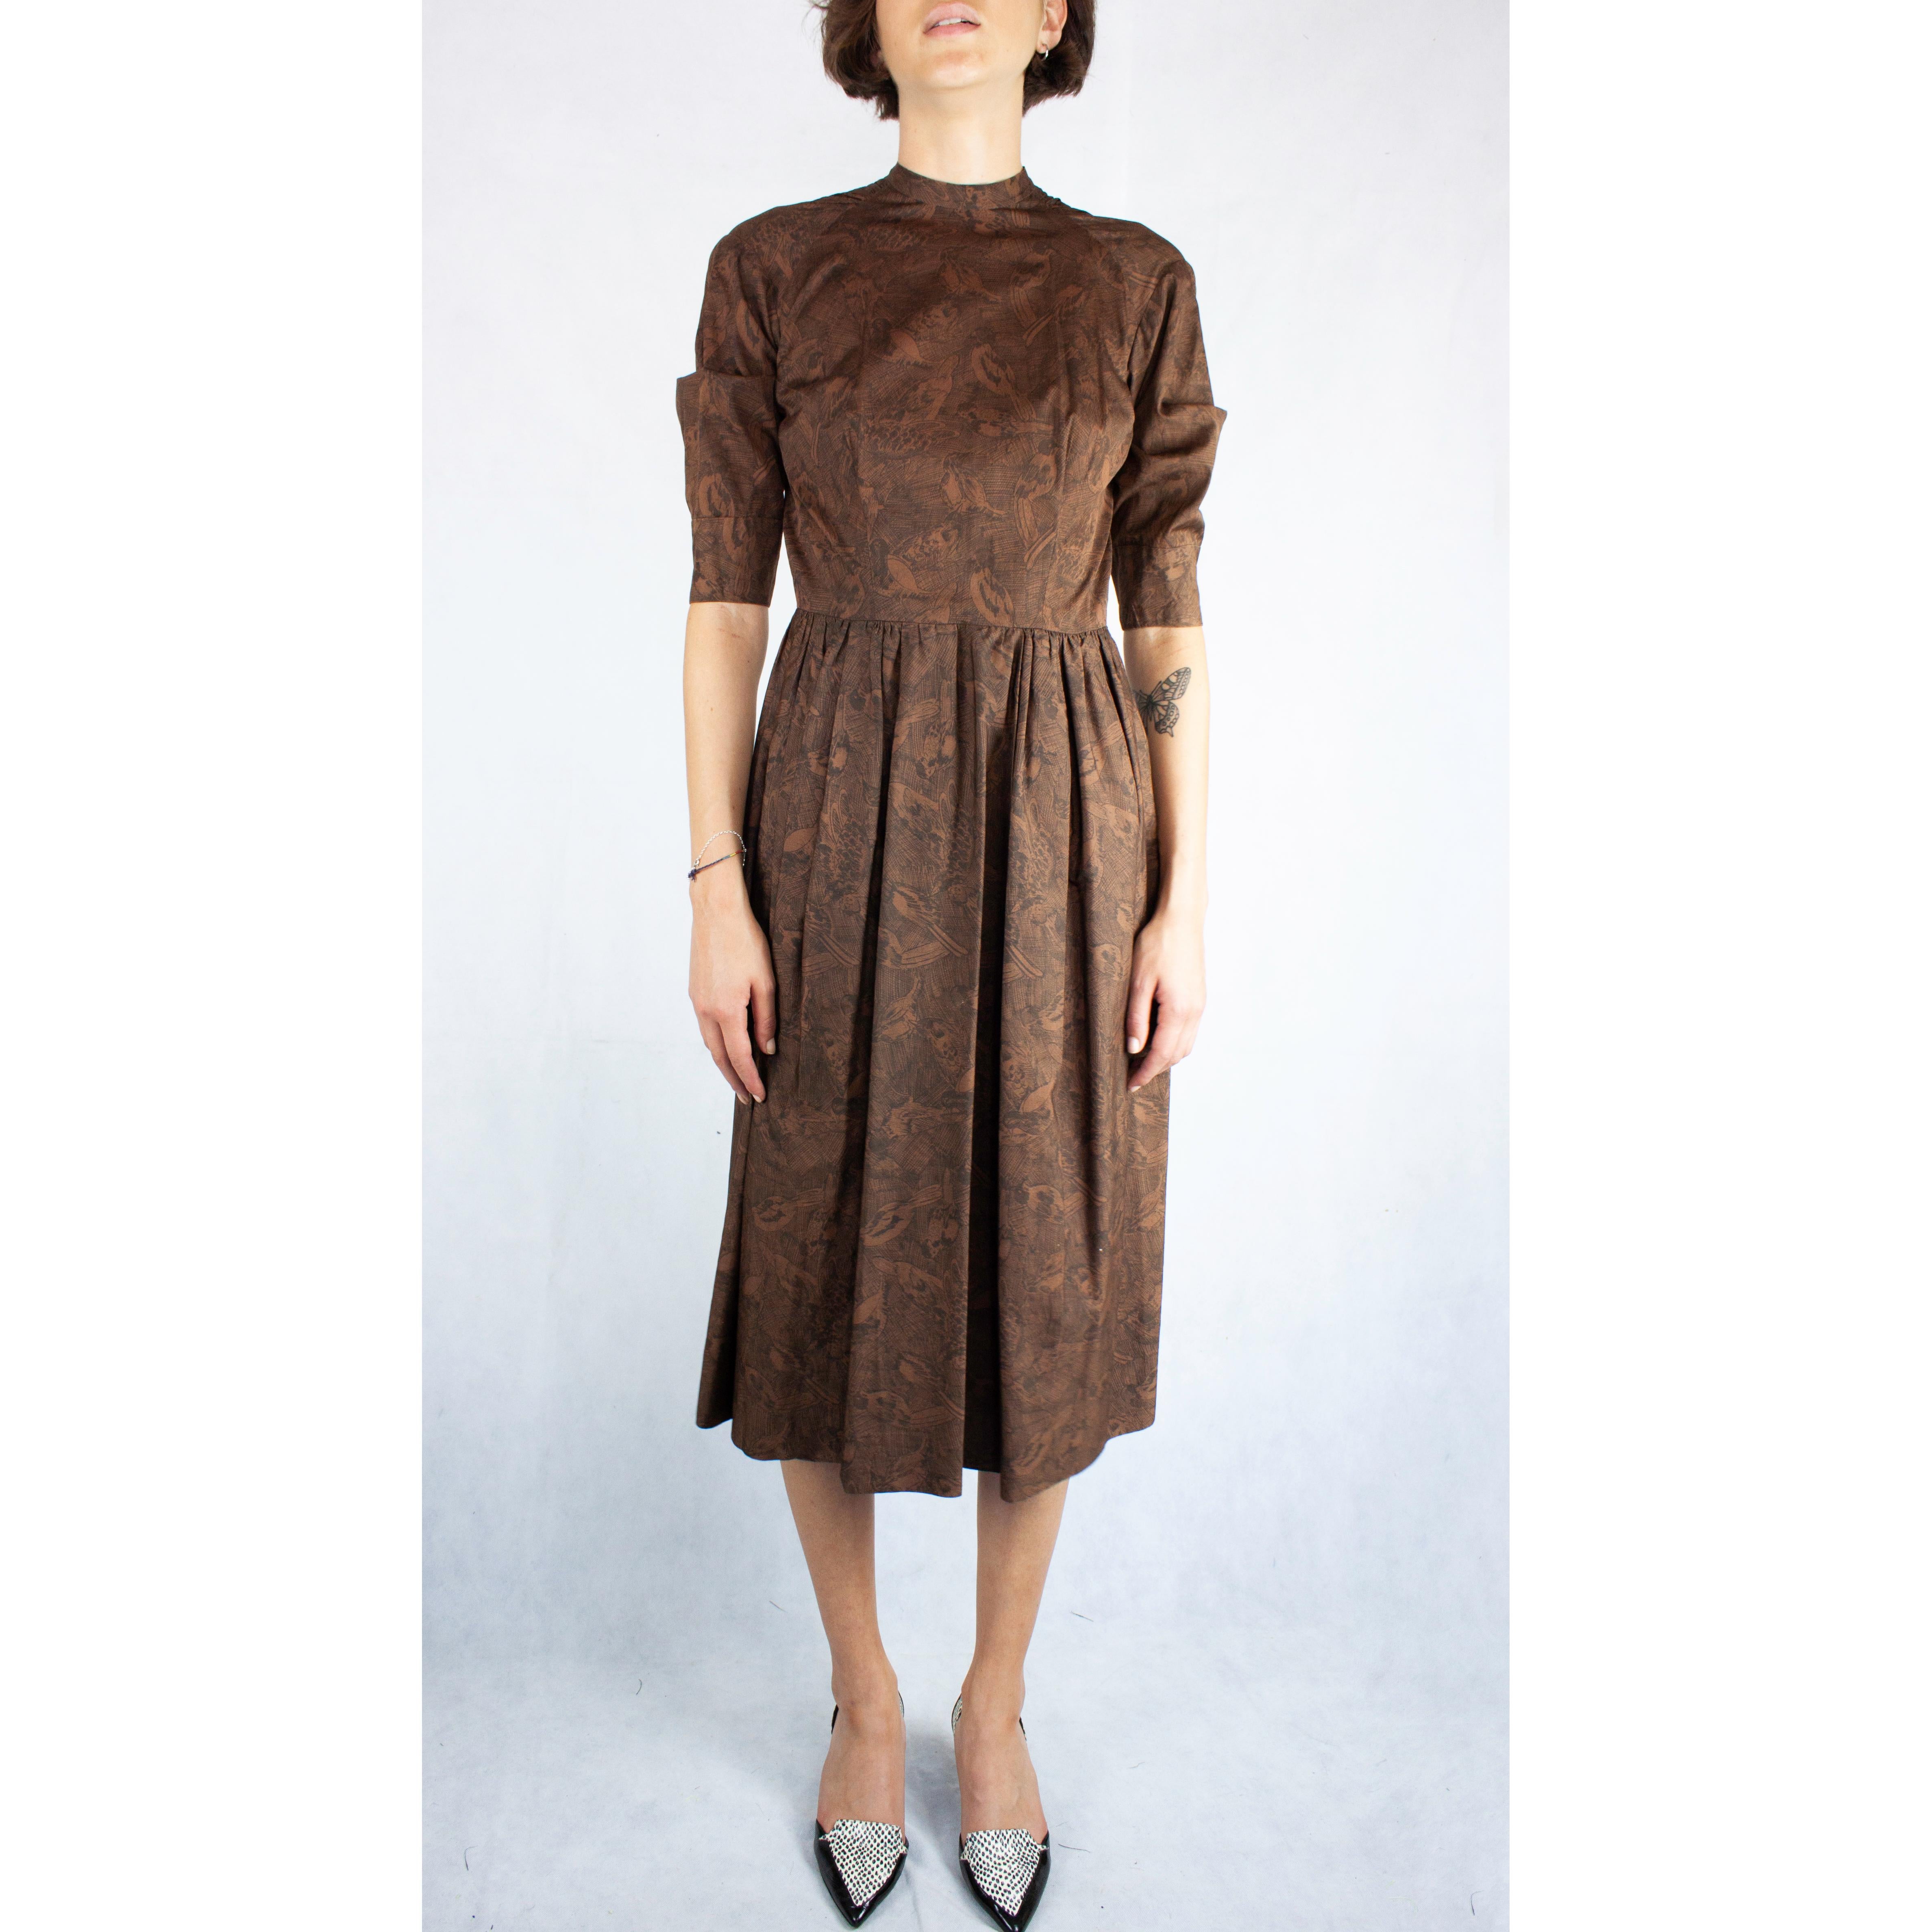 
Heritage and tradition are key words in fashion to describe Hermès.
Like many of the world’s most prestigious luxury , such as Gucci and Vuitton, Hermès  have a long history going back more than a century.

This dress is a piece that certainly